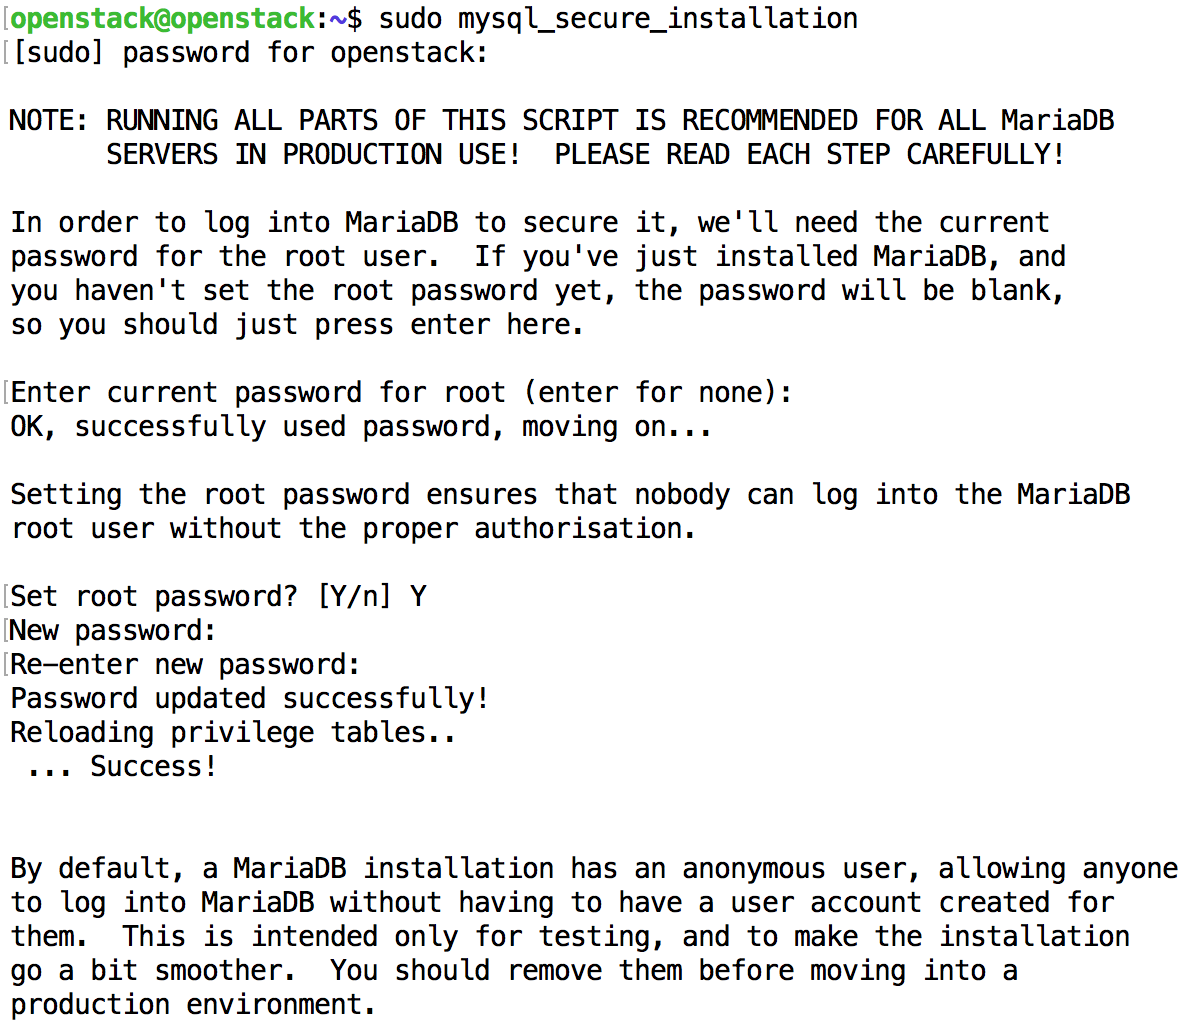 mysql_secure_installation command to change root password